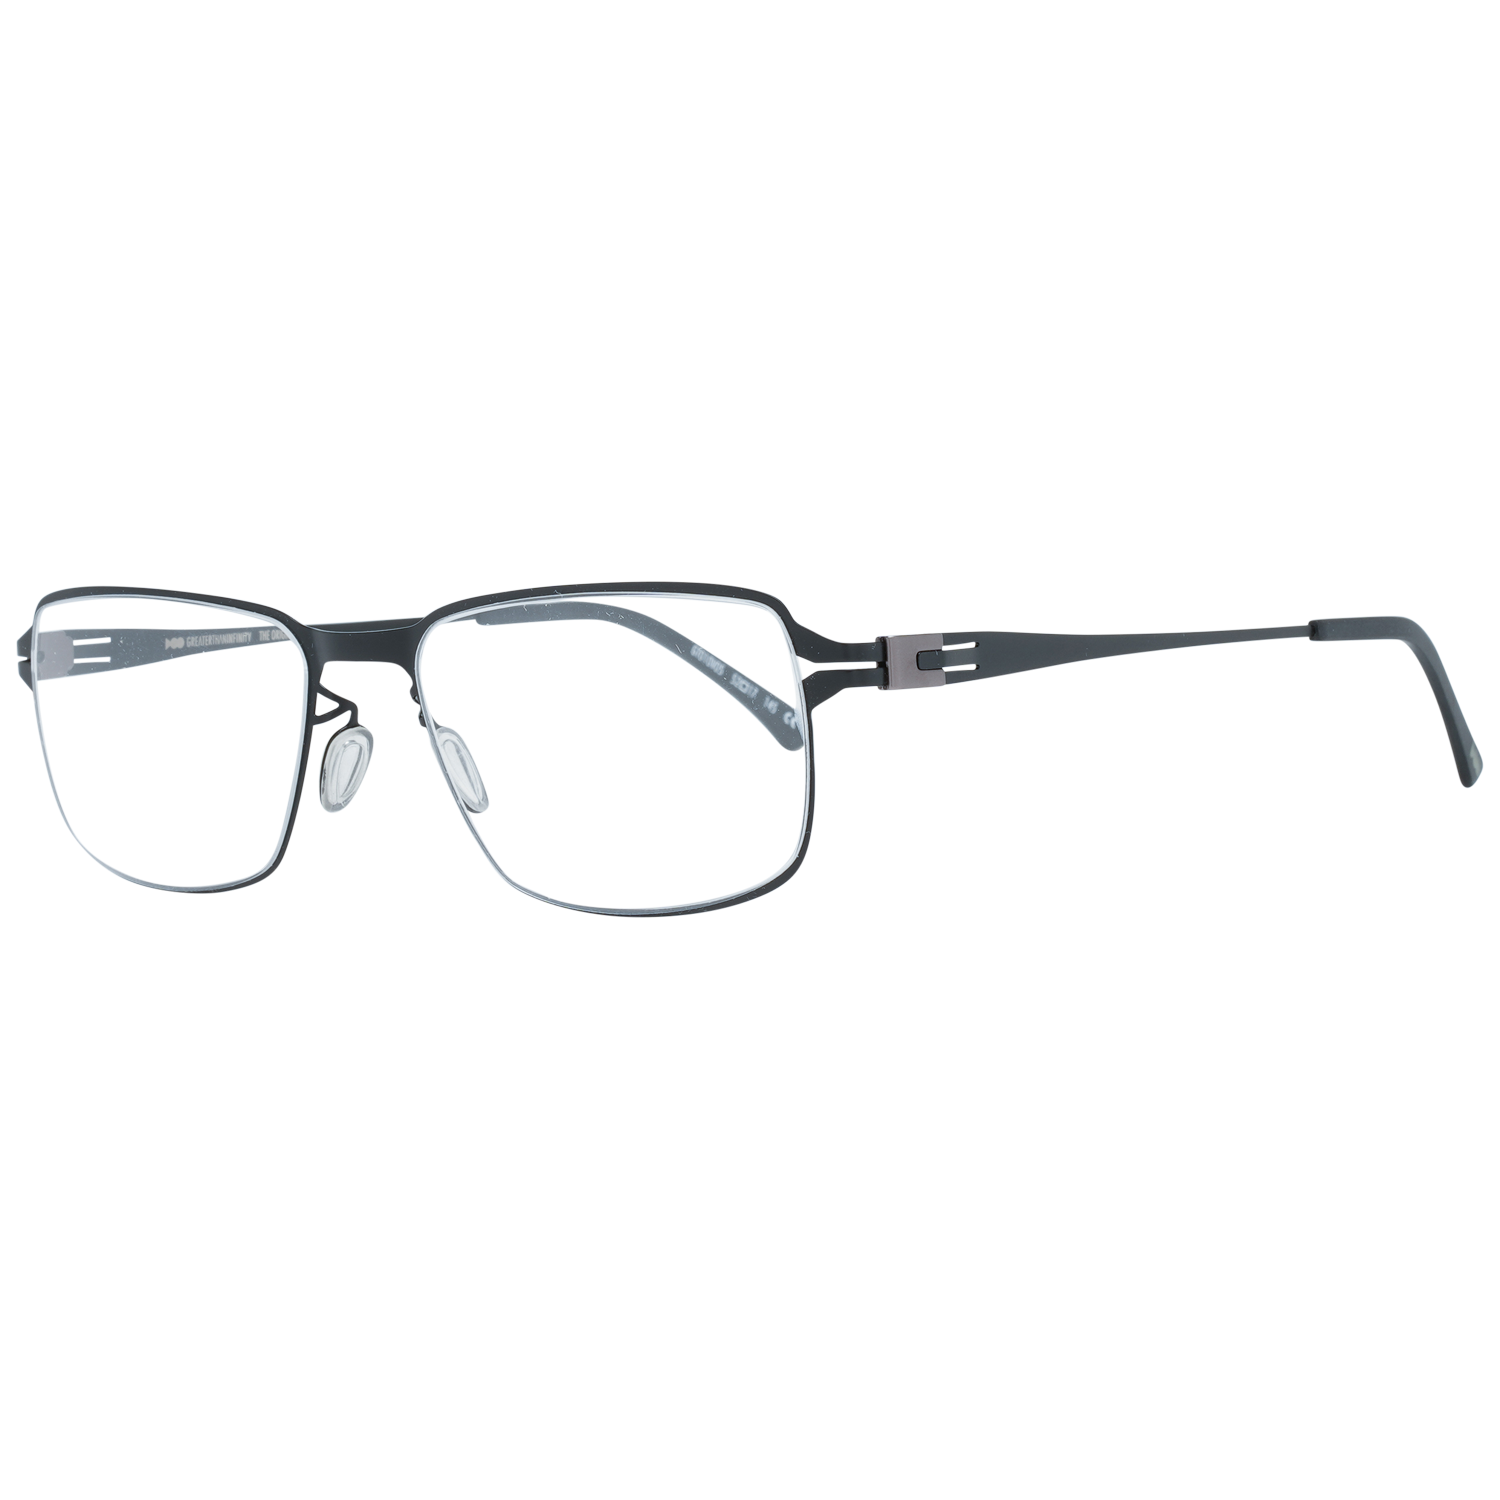 Greater Than INFINITY Green Black GT010 V05N Eyeglasses 52mm Made in Italy